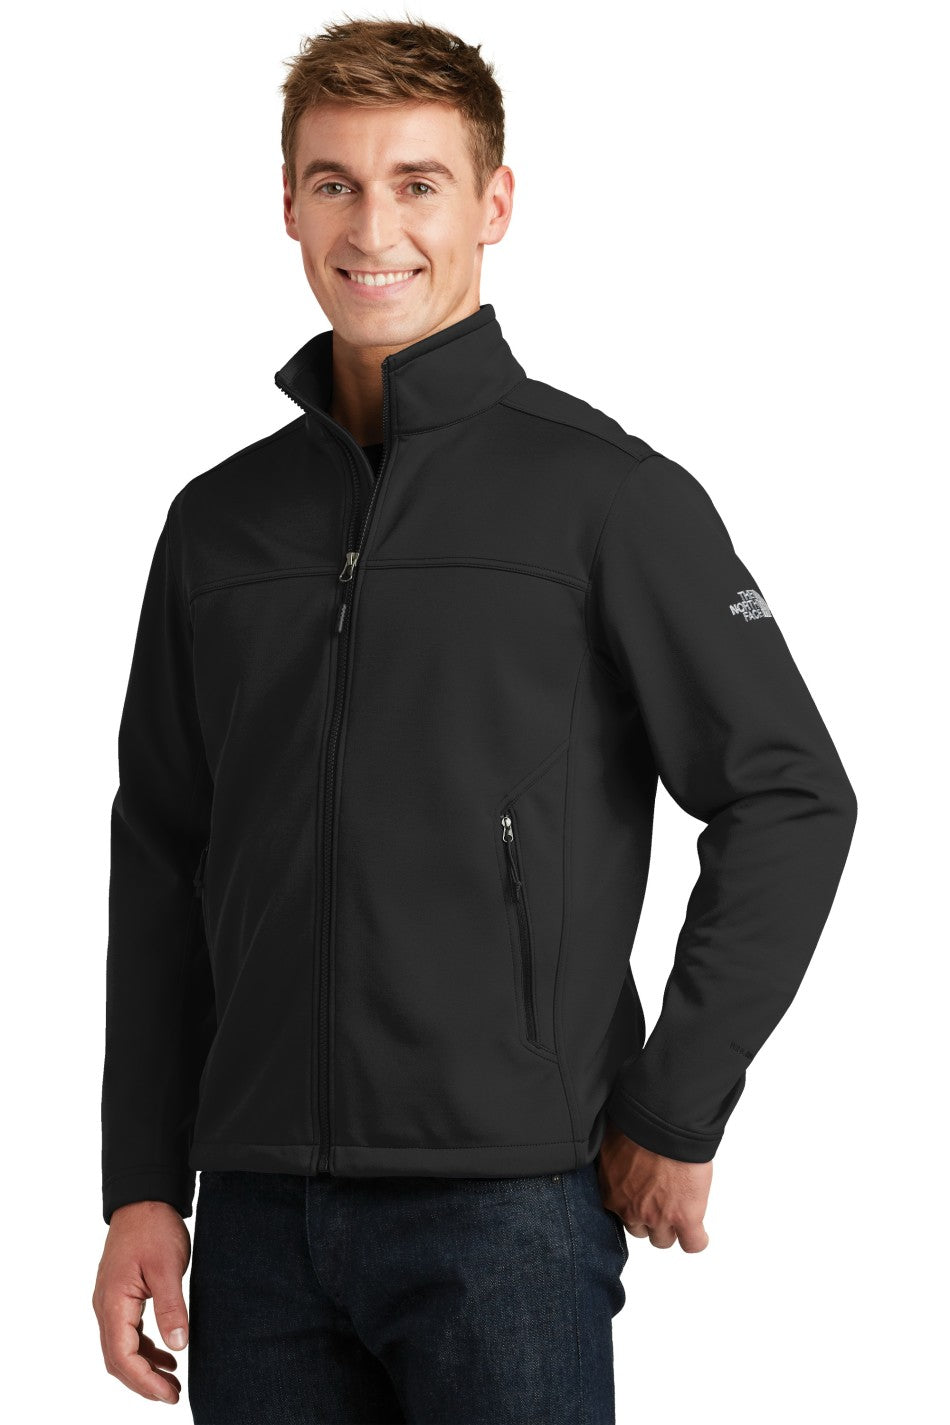 THE NORTH FACE® RIDGELINE SOFT SHELL 